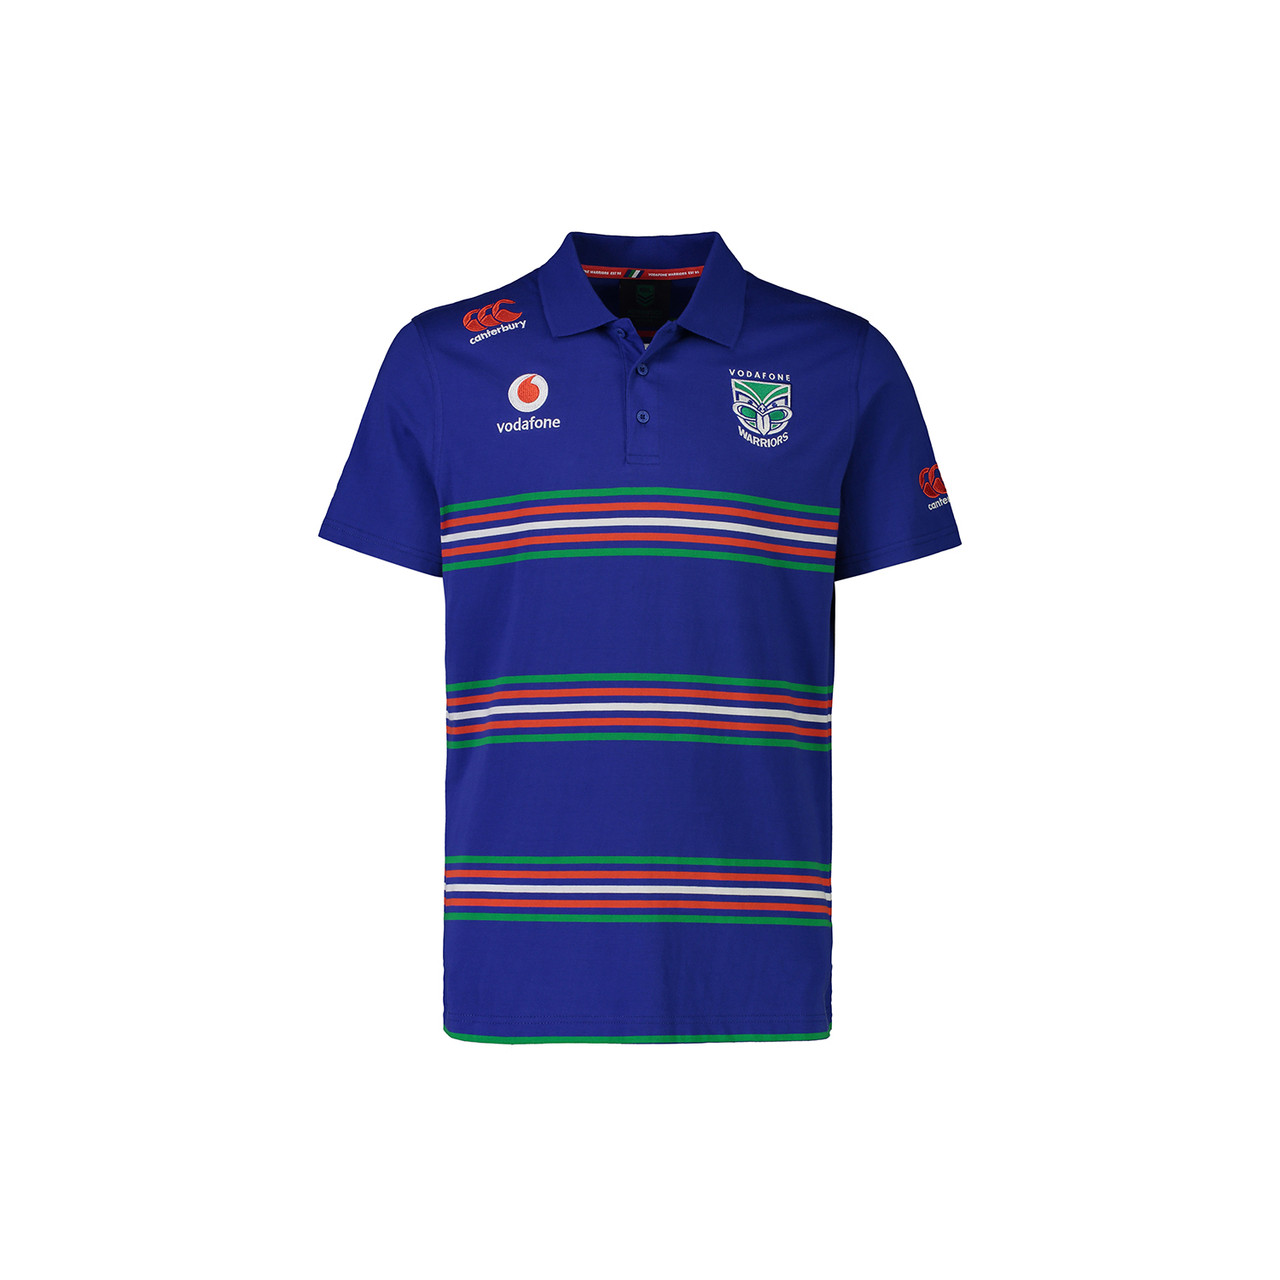 New & Authentic New Zealand Warrior Vodafone Training Polo Rugby League 